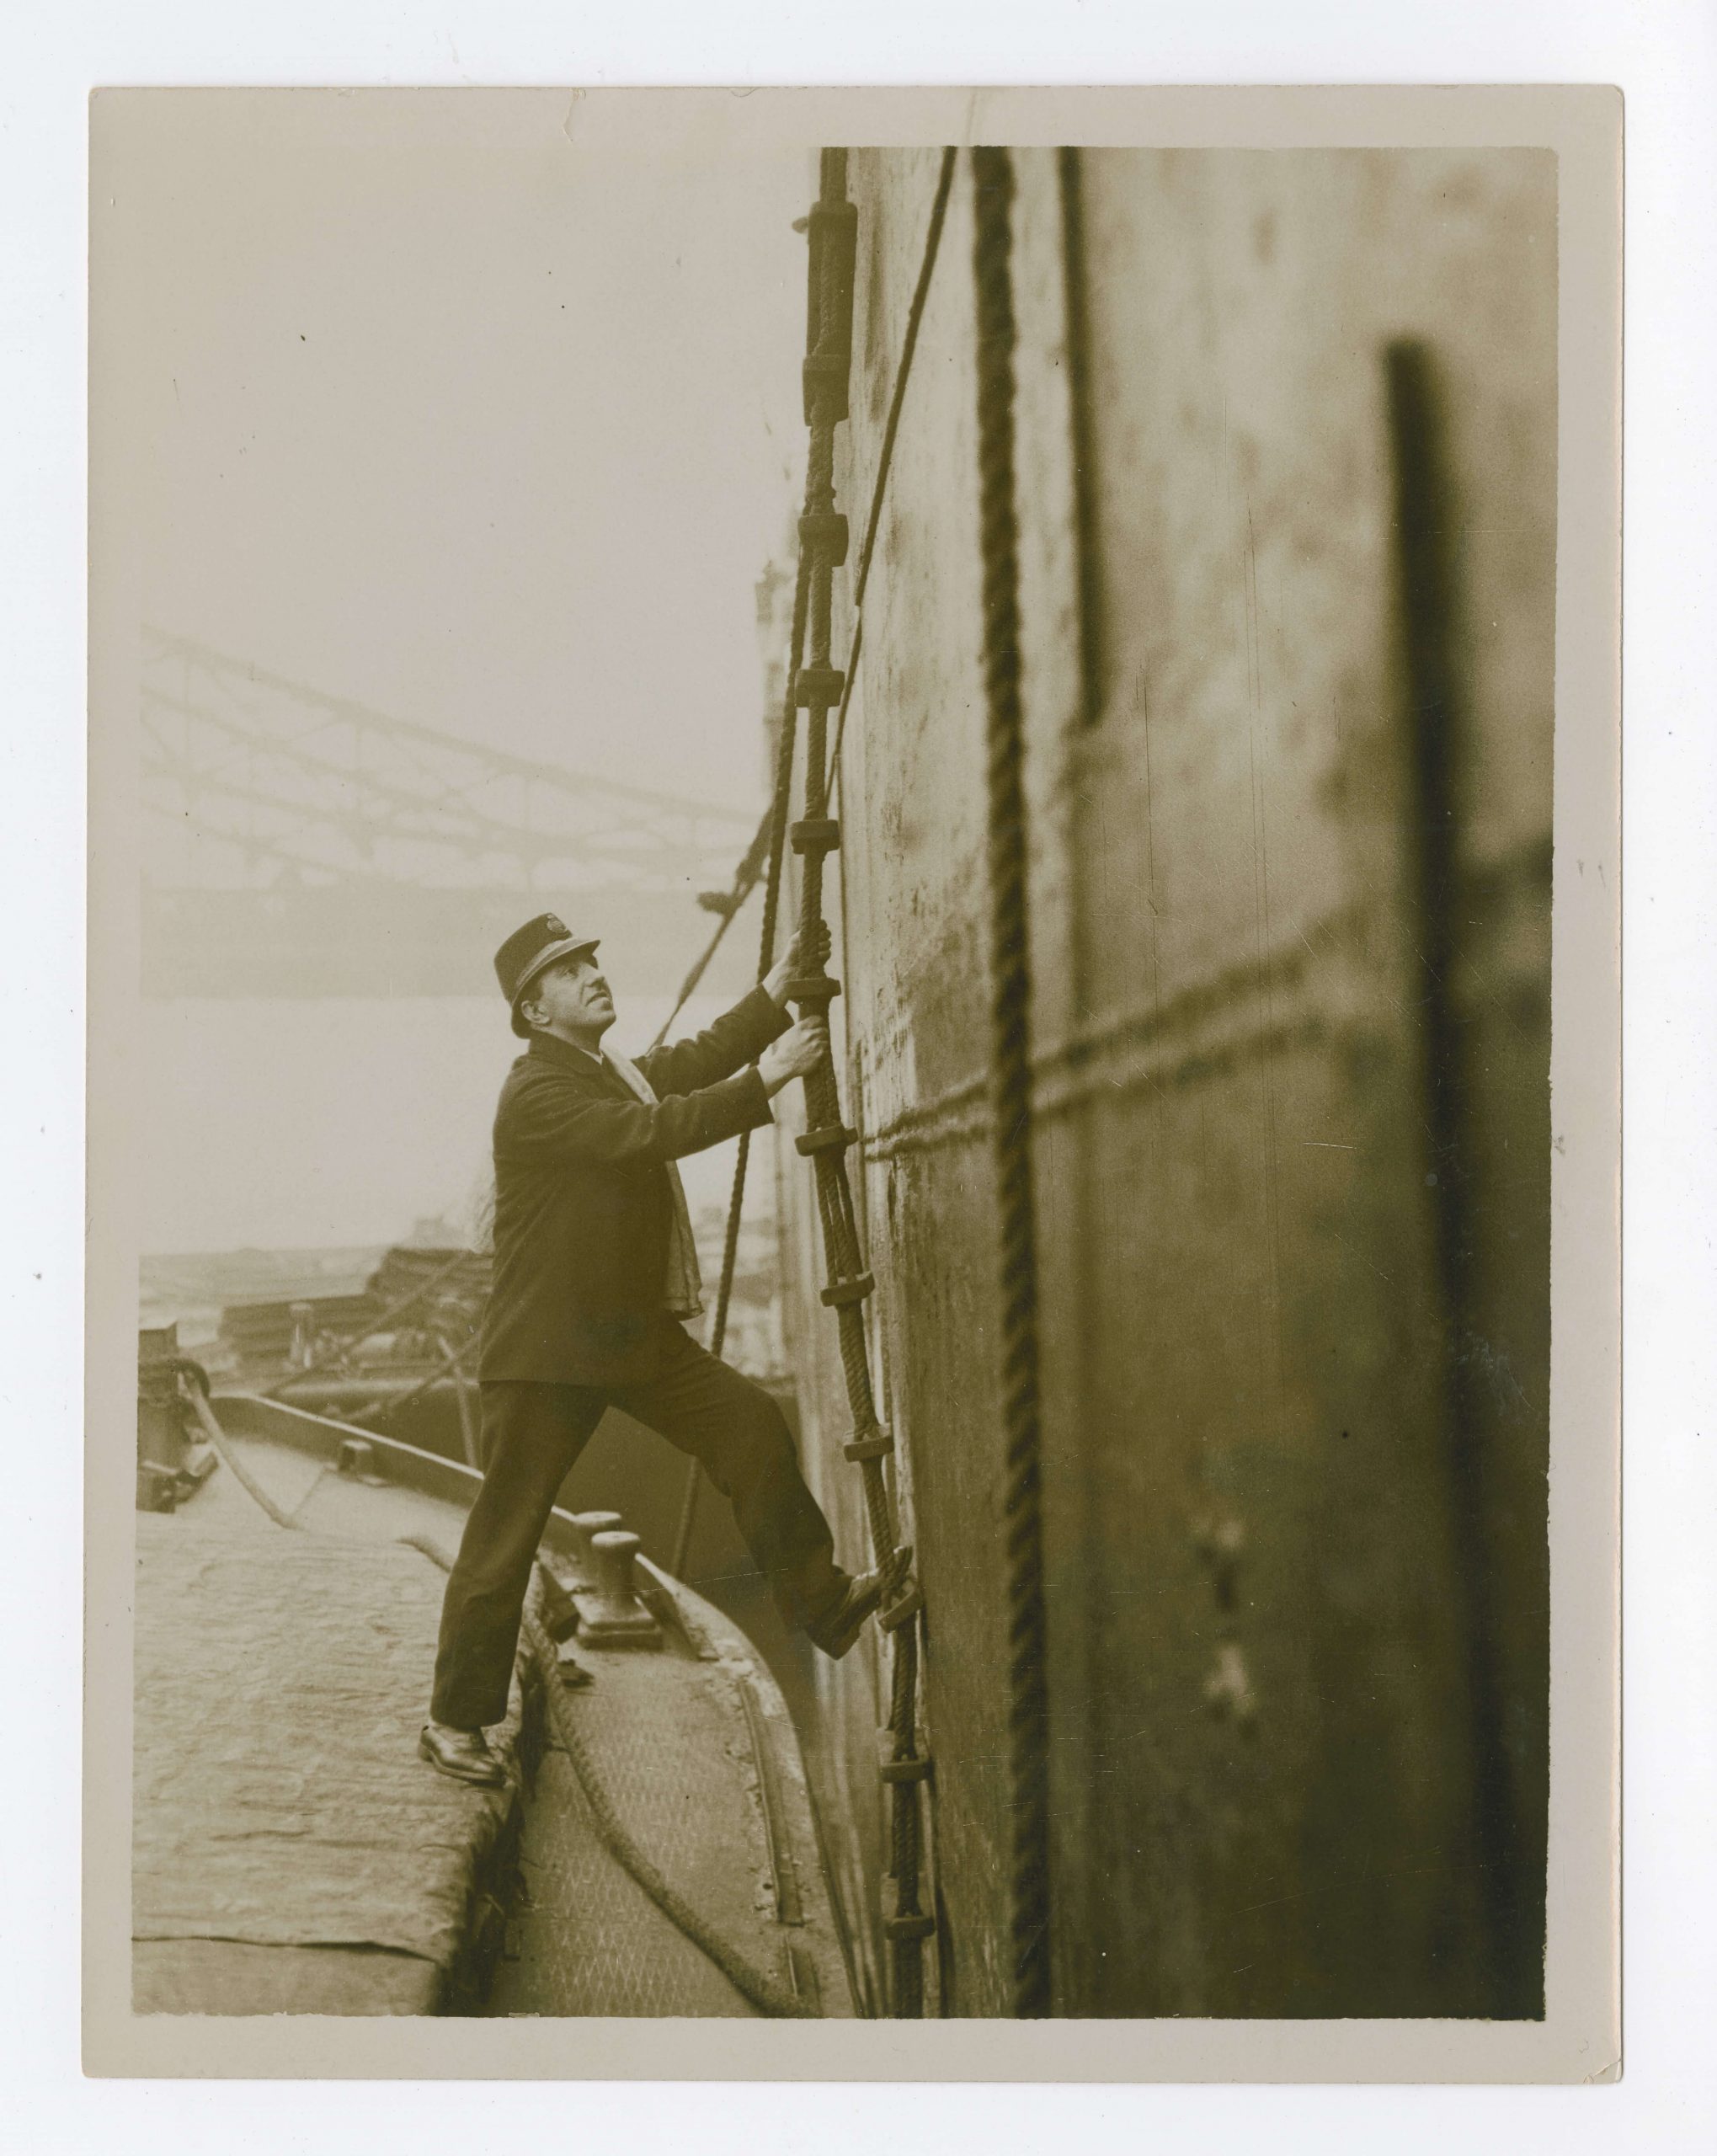 Herbet climbs up a rickety rope ladder, hanging off the side of a large ship. The ladder isn't fixed at the bottom of the boat, so climbing up and down would require a lot of core strength!